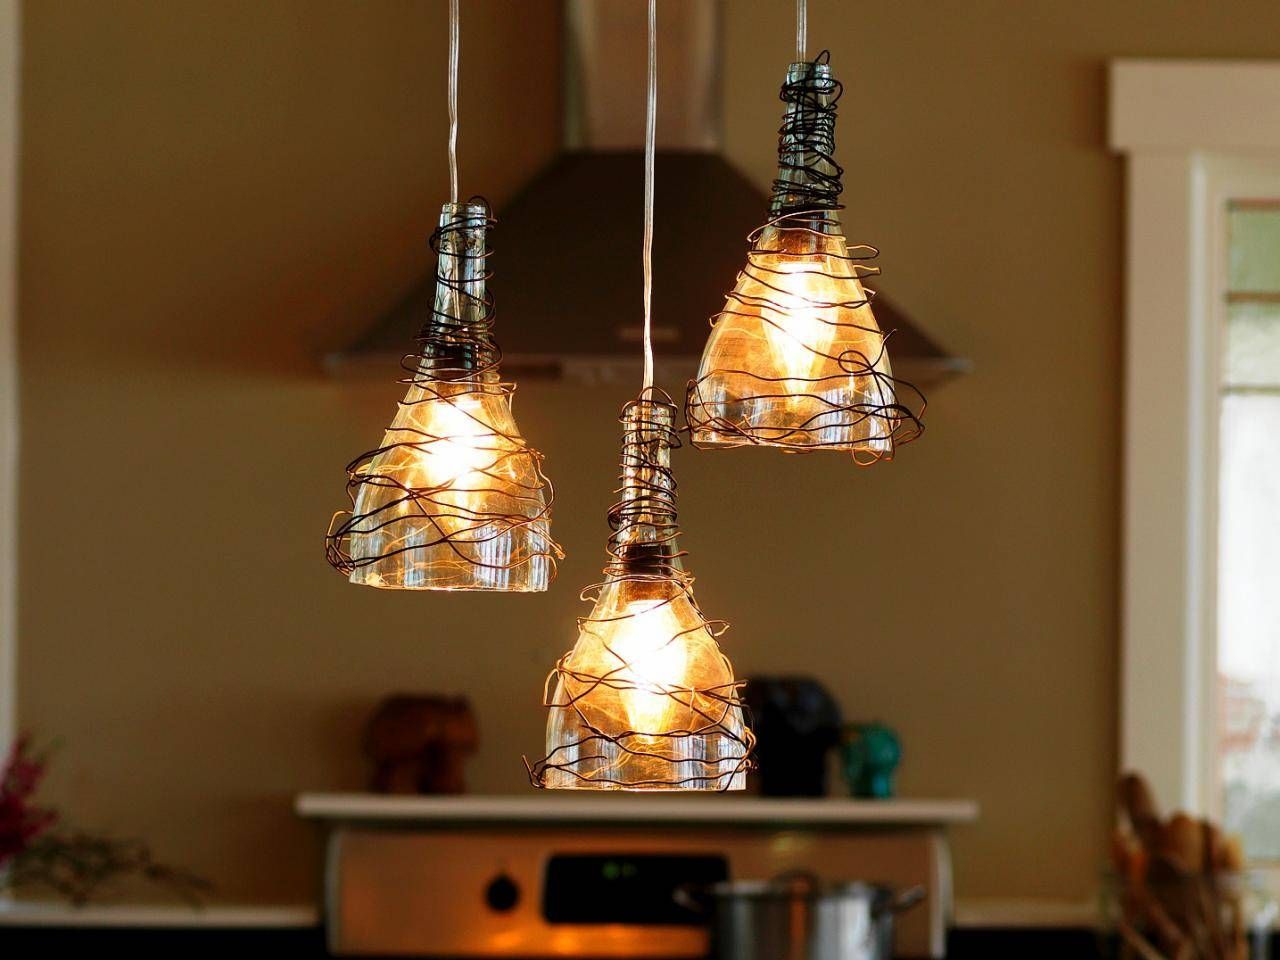 Upcycle Wine Bottle Into Pendant Light Fixtures | How Tos | Diy Inside Bottle Pendant Lights (View 2 of 15)